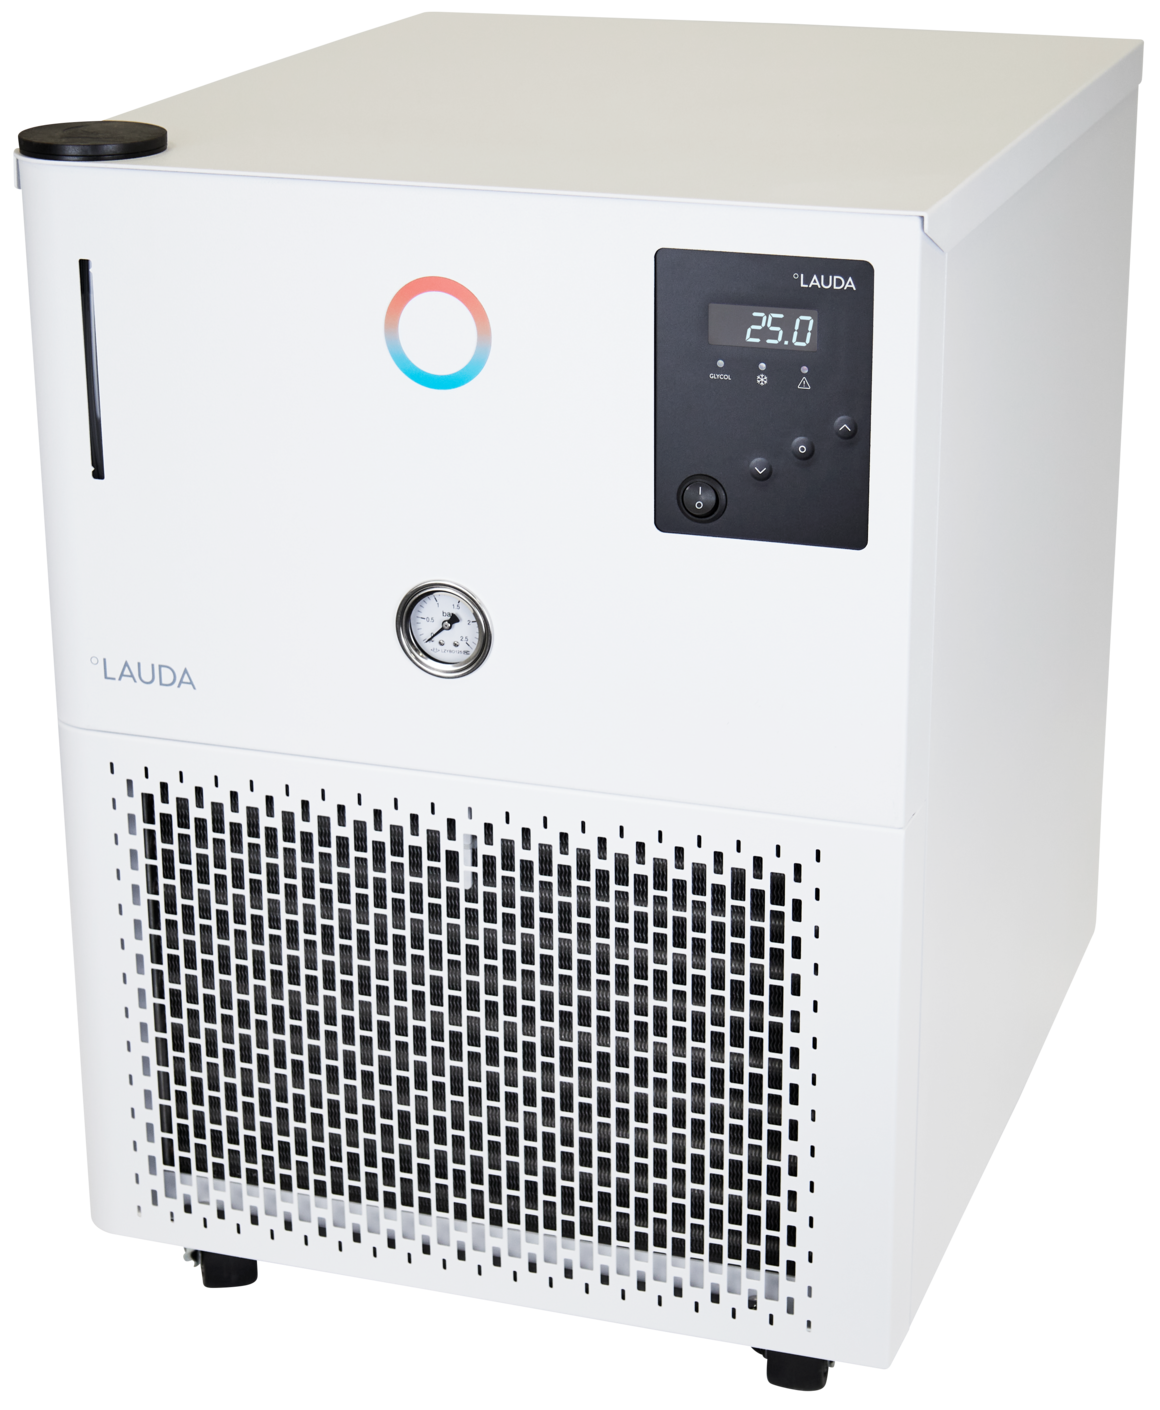 Microcool Circulation chillers